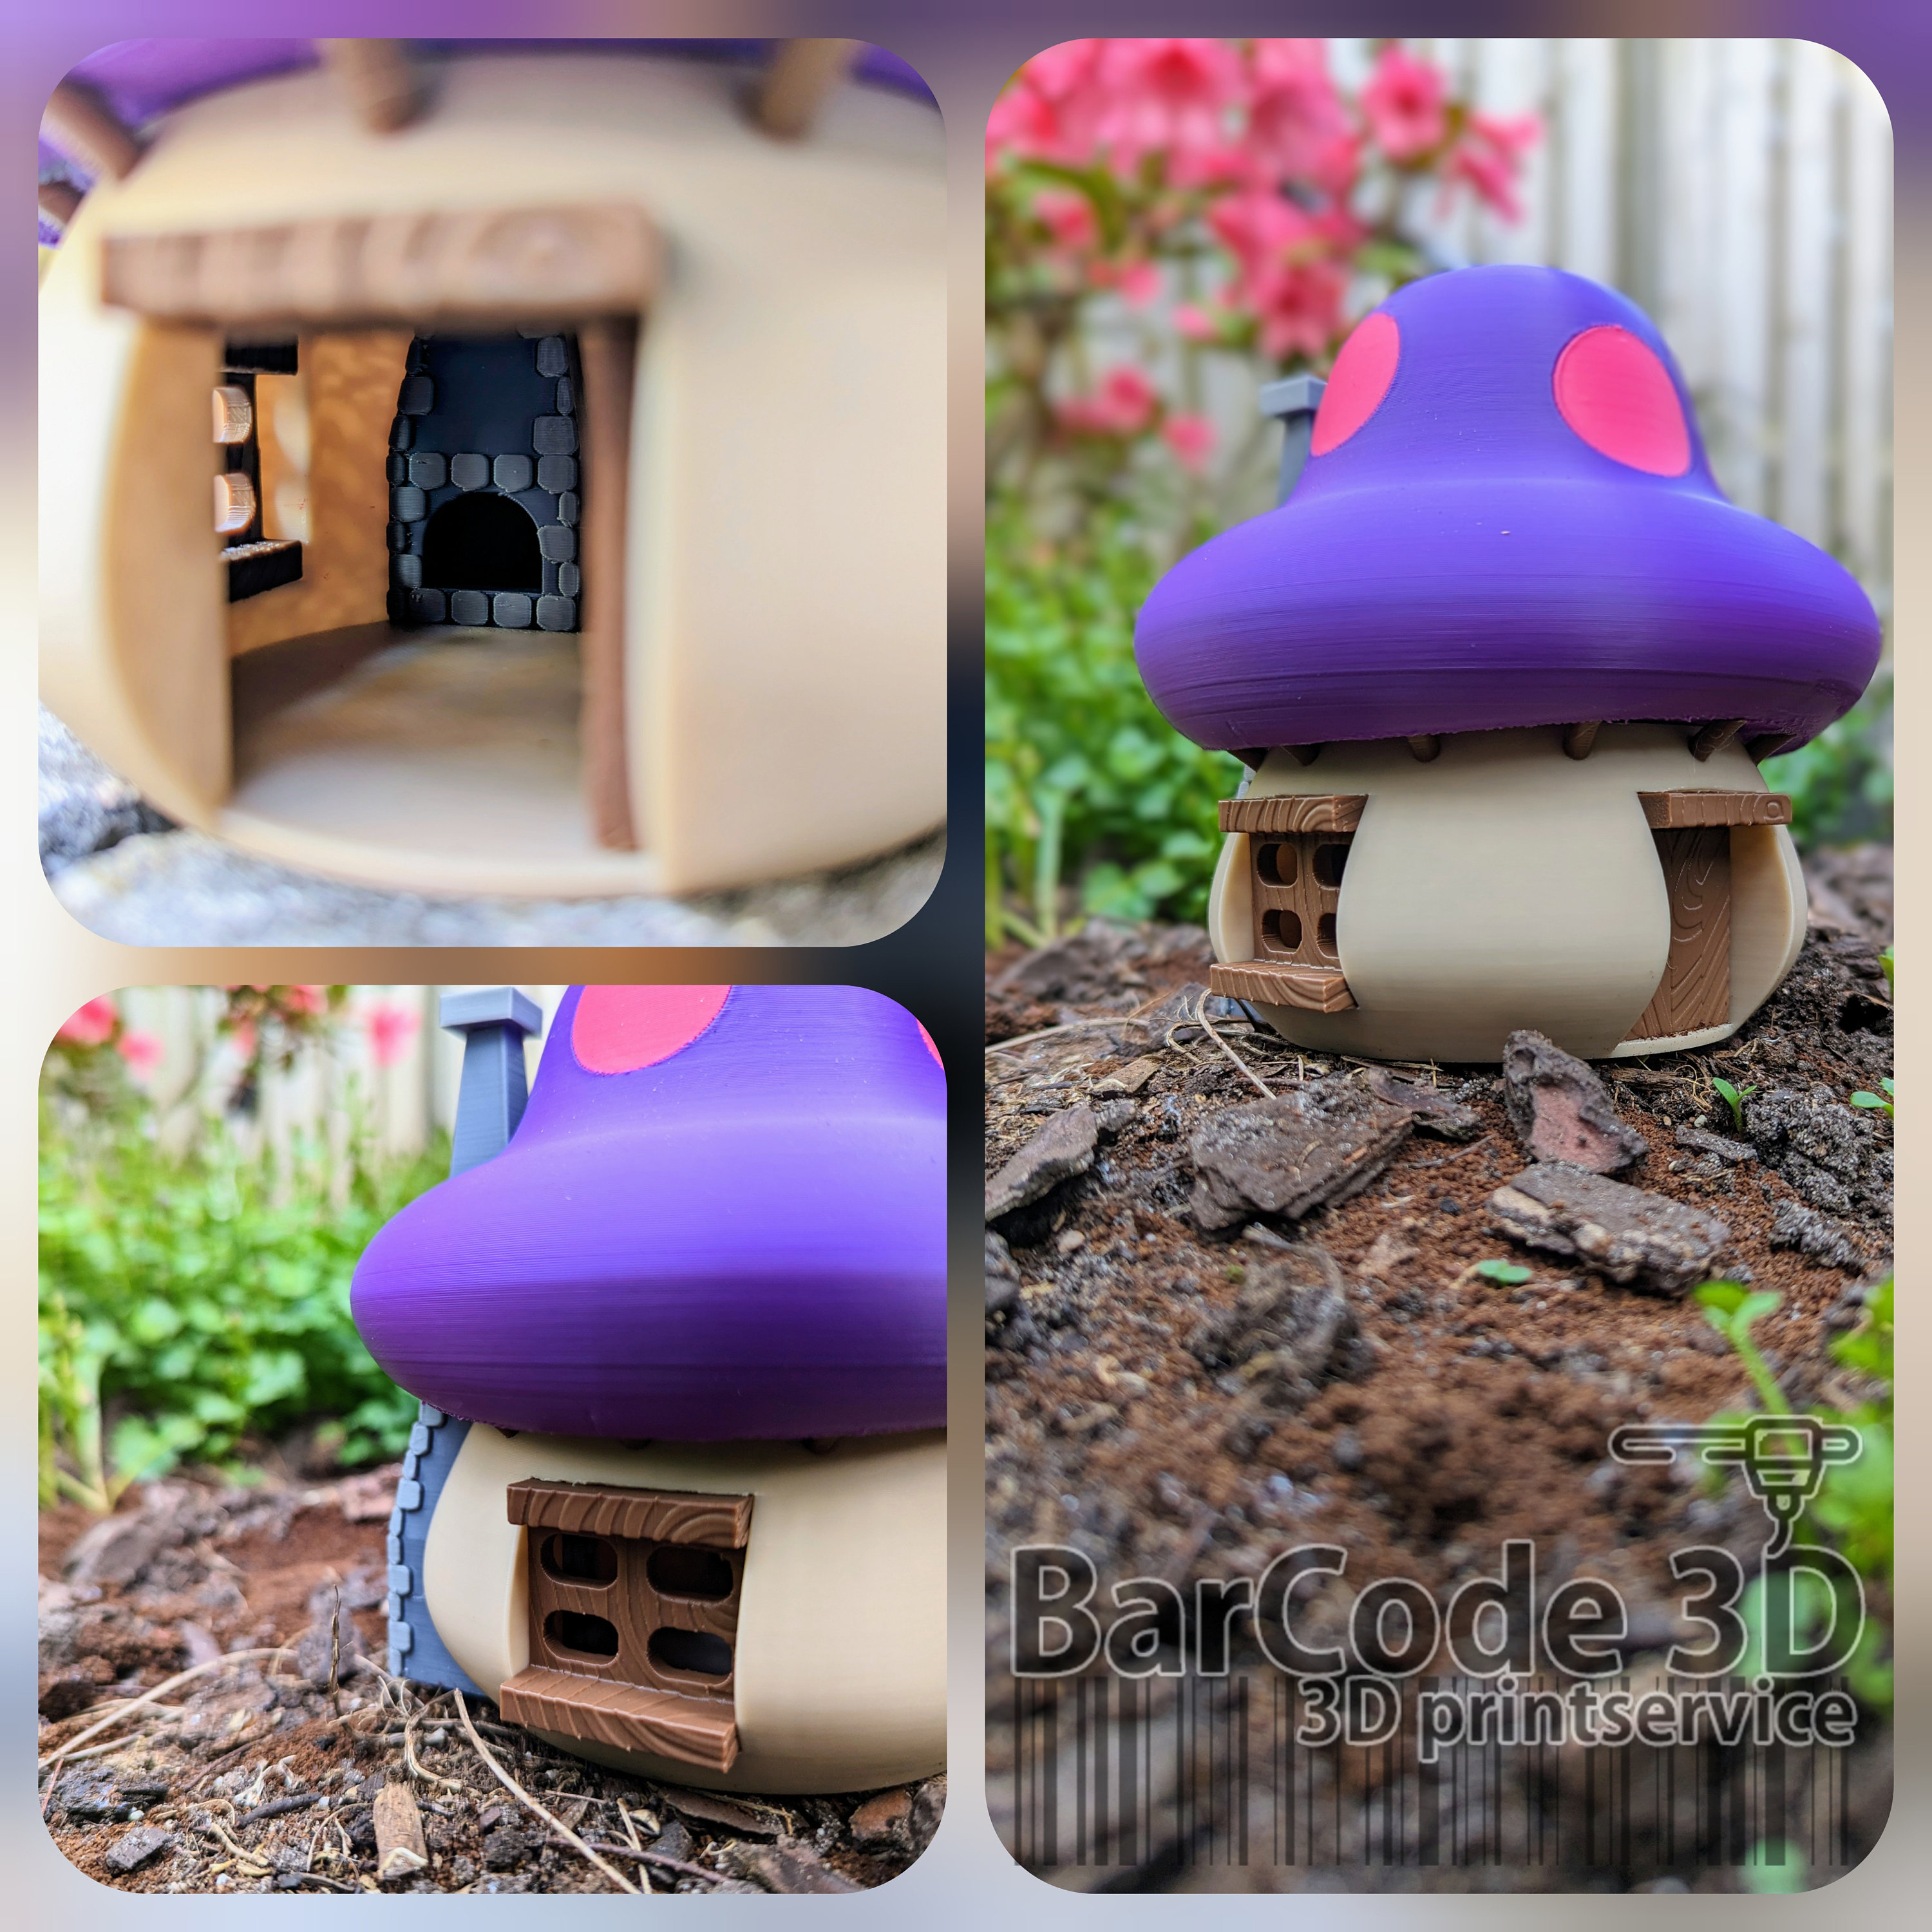  Smurfs The Lost Village Mushroom House Playset with